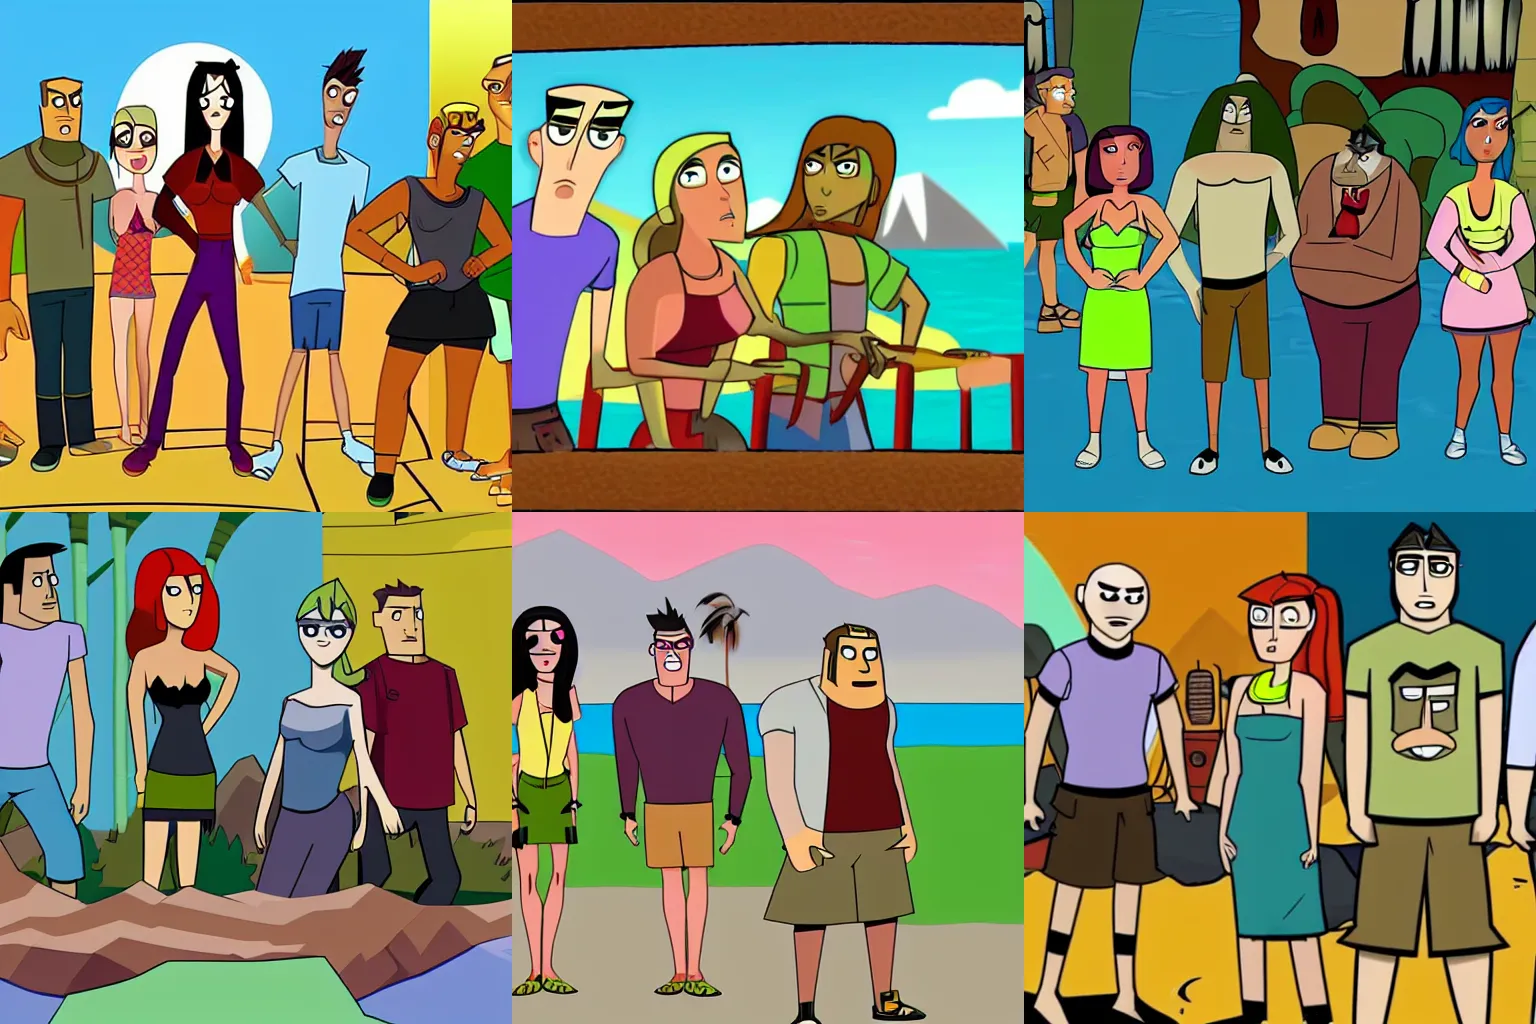 Prompt: screenshot from the animated show Total Drama Island